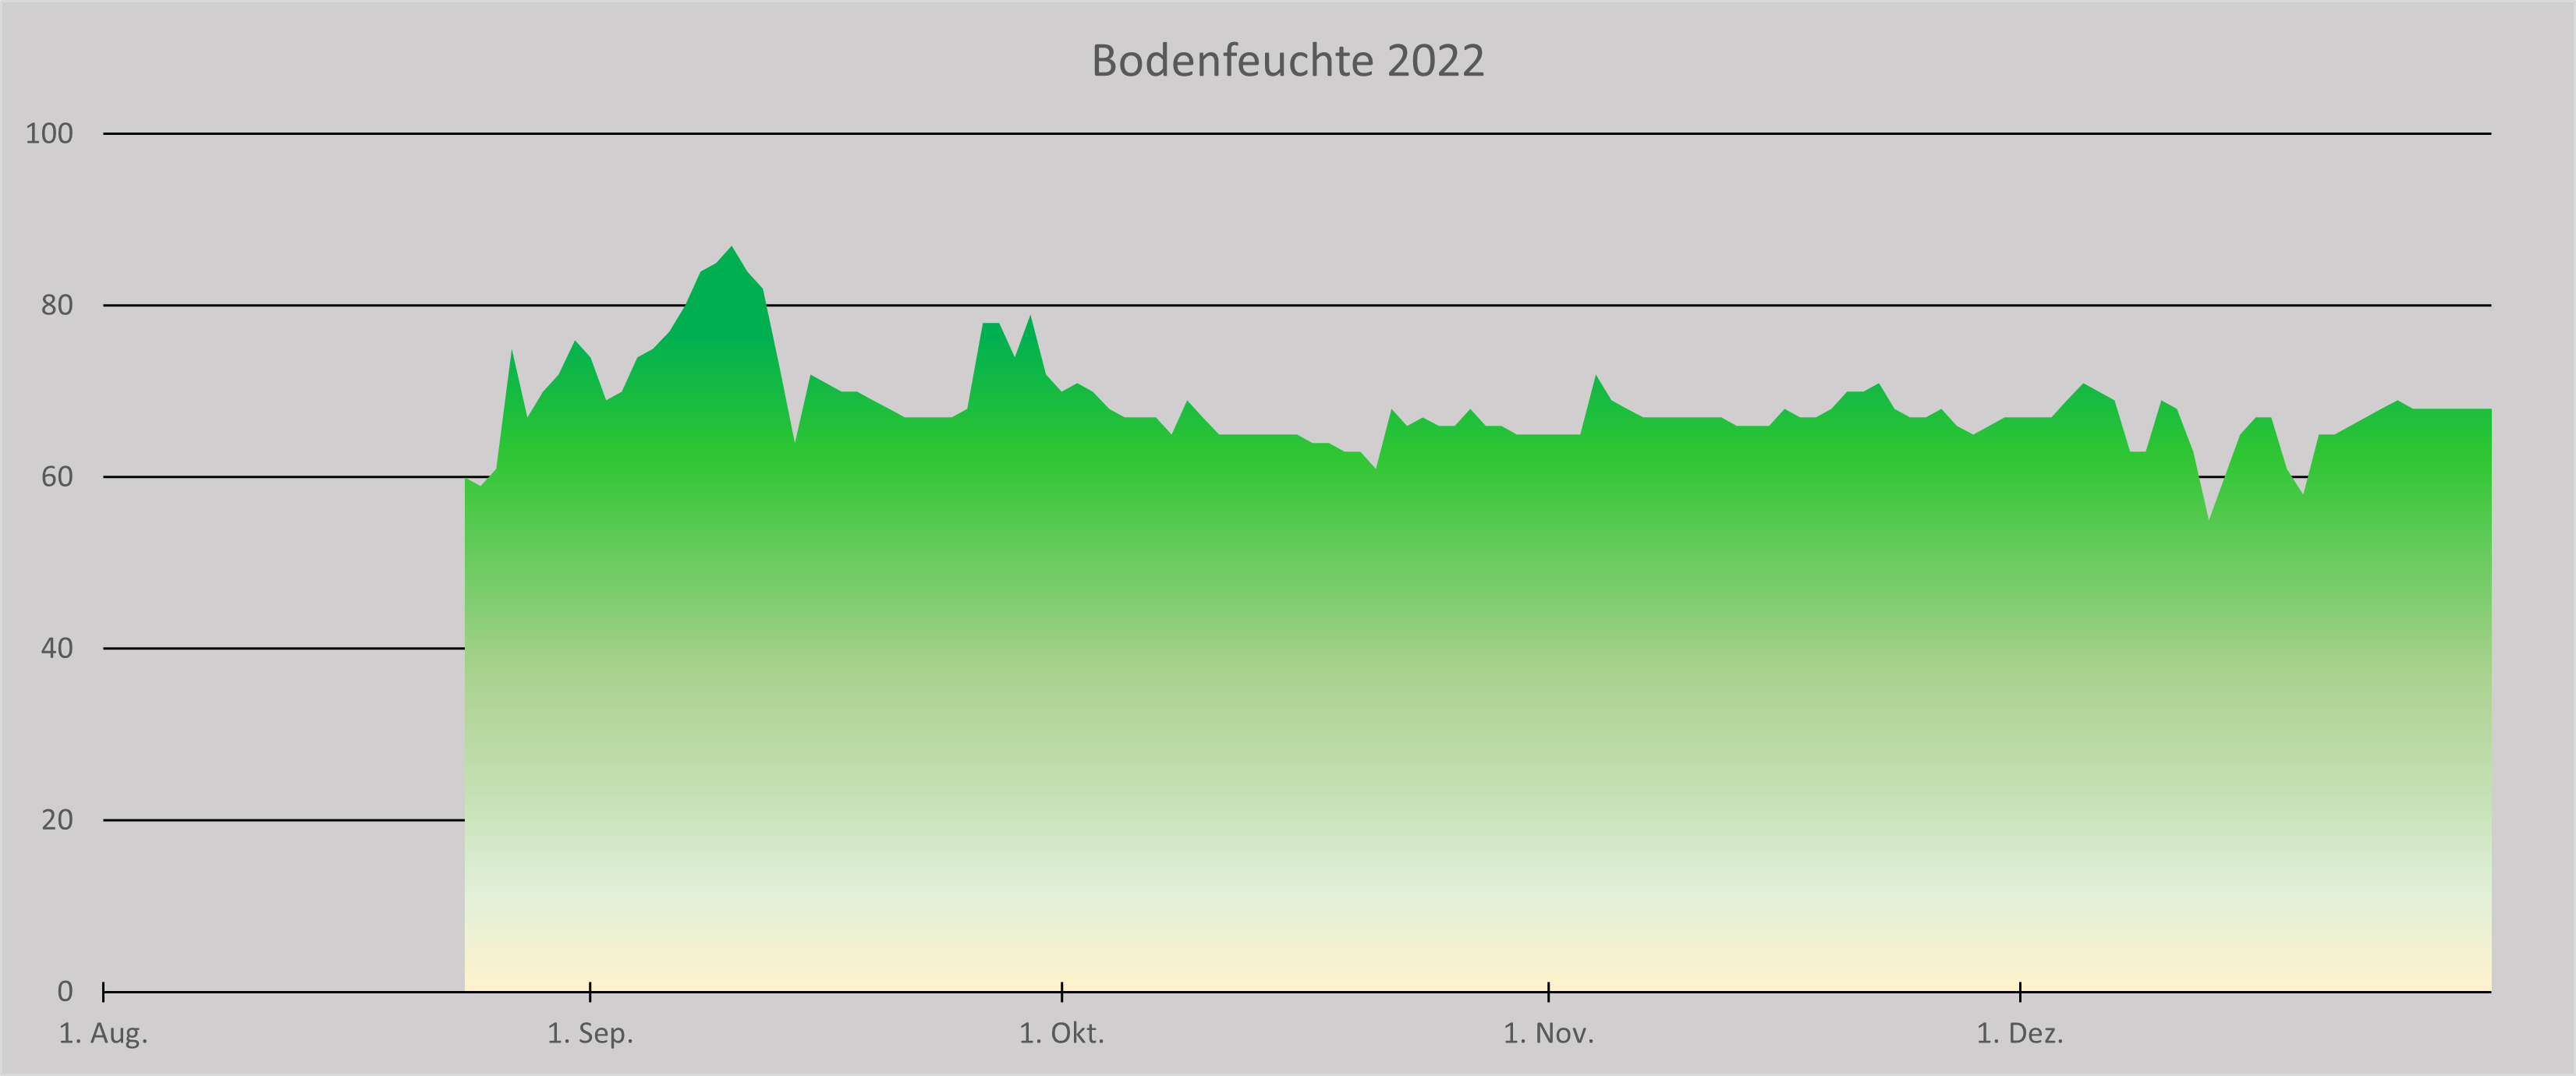 Bodenfeuchte 2022.png